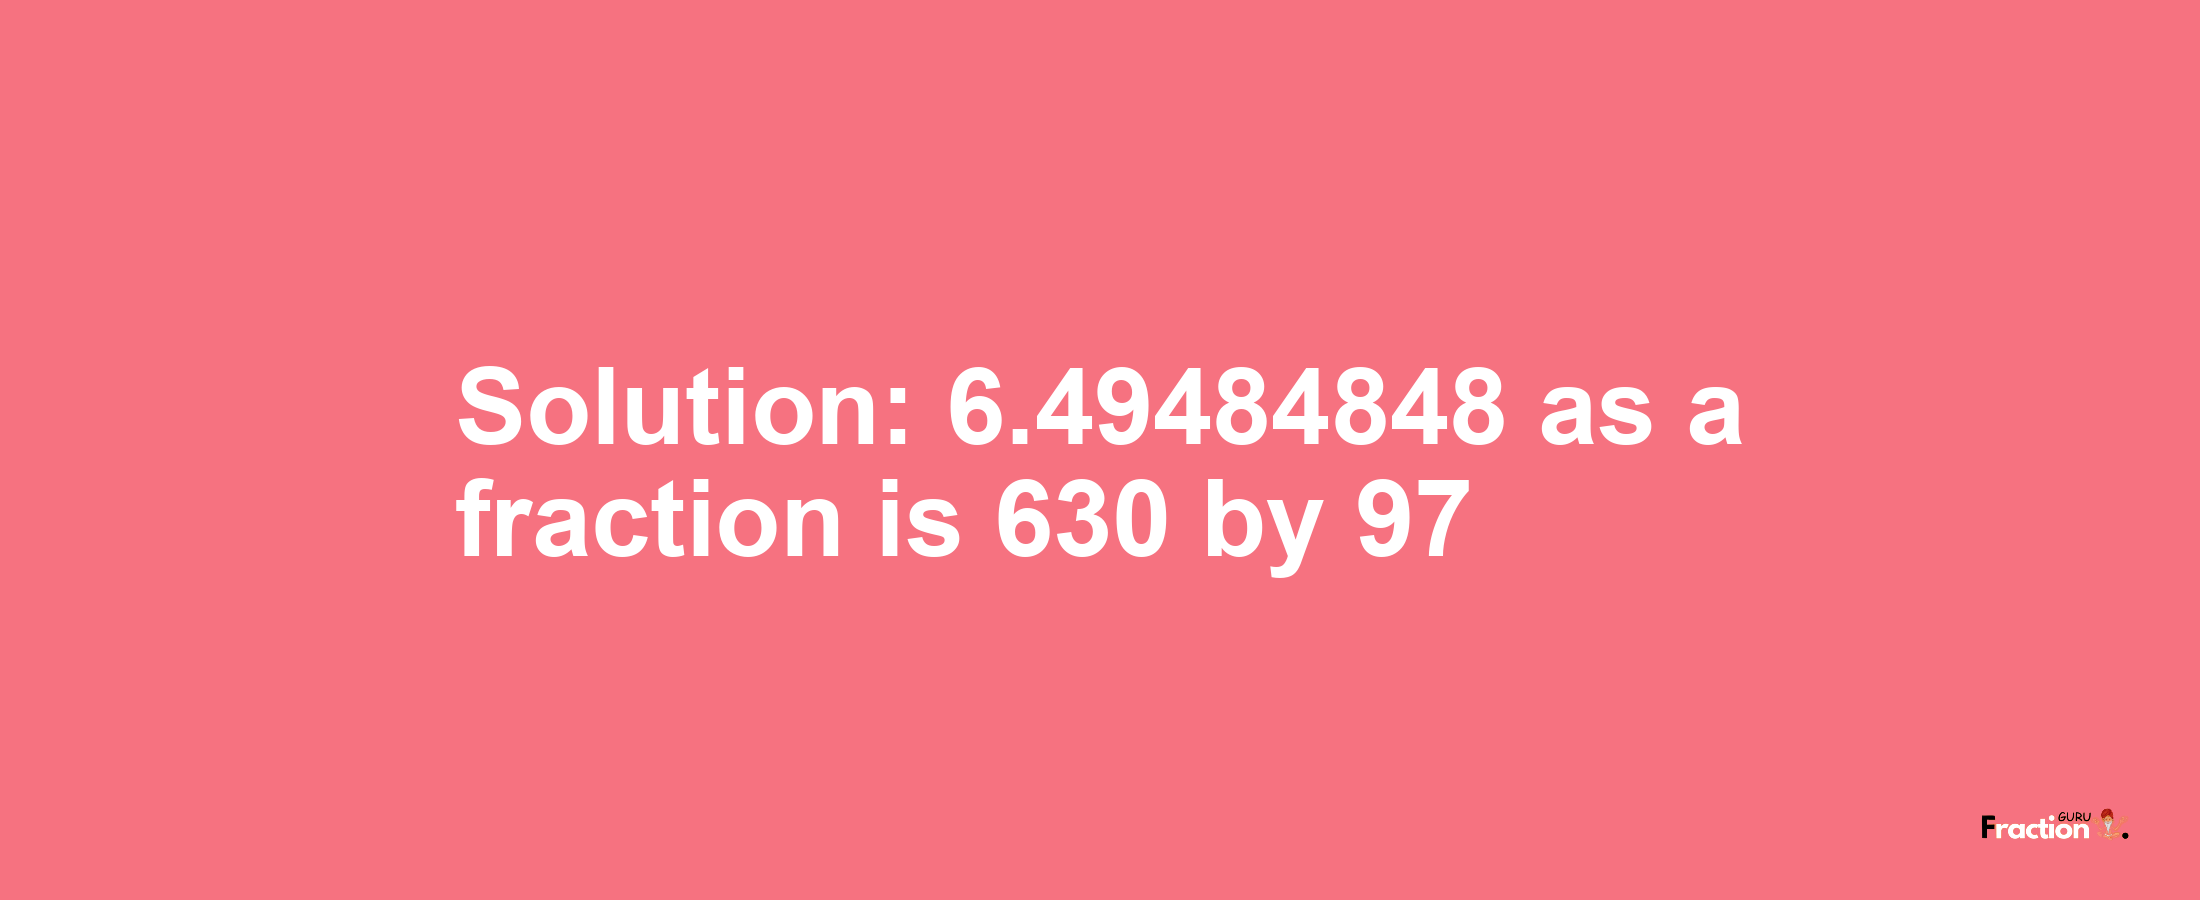 Solution:6.49484848 as a fraction is 630/97